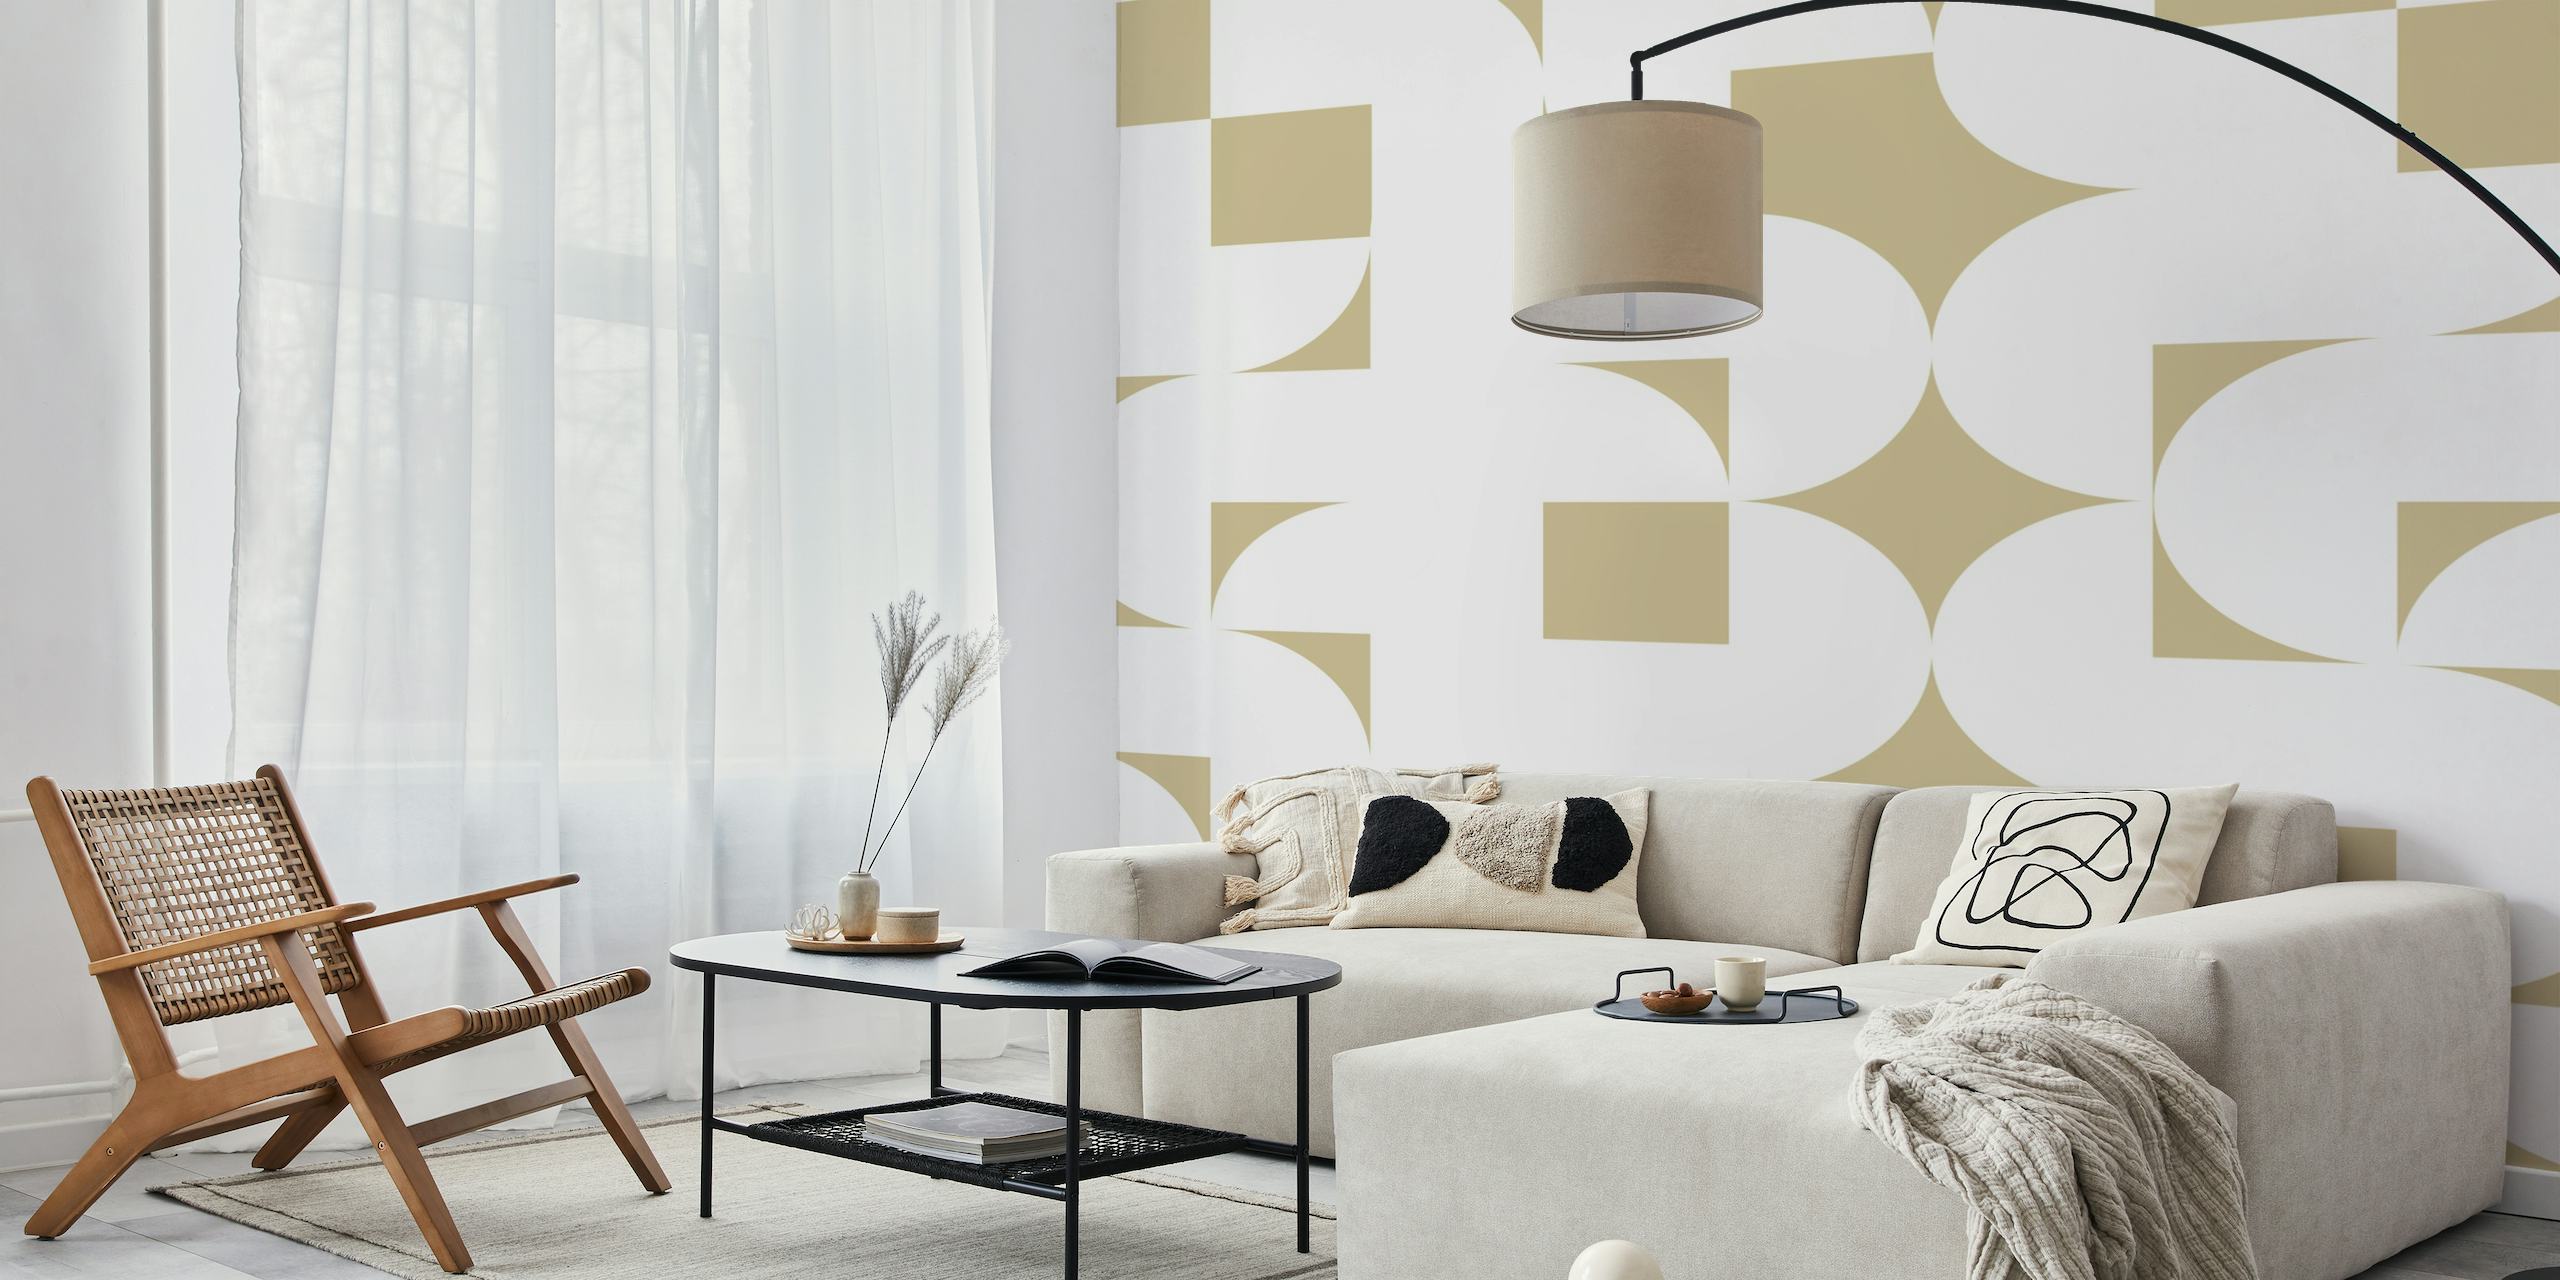 Curvy Cream geometric wall mural with creamy taupe and off-white tones